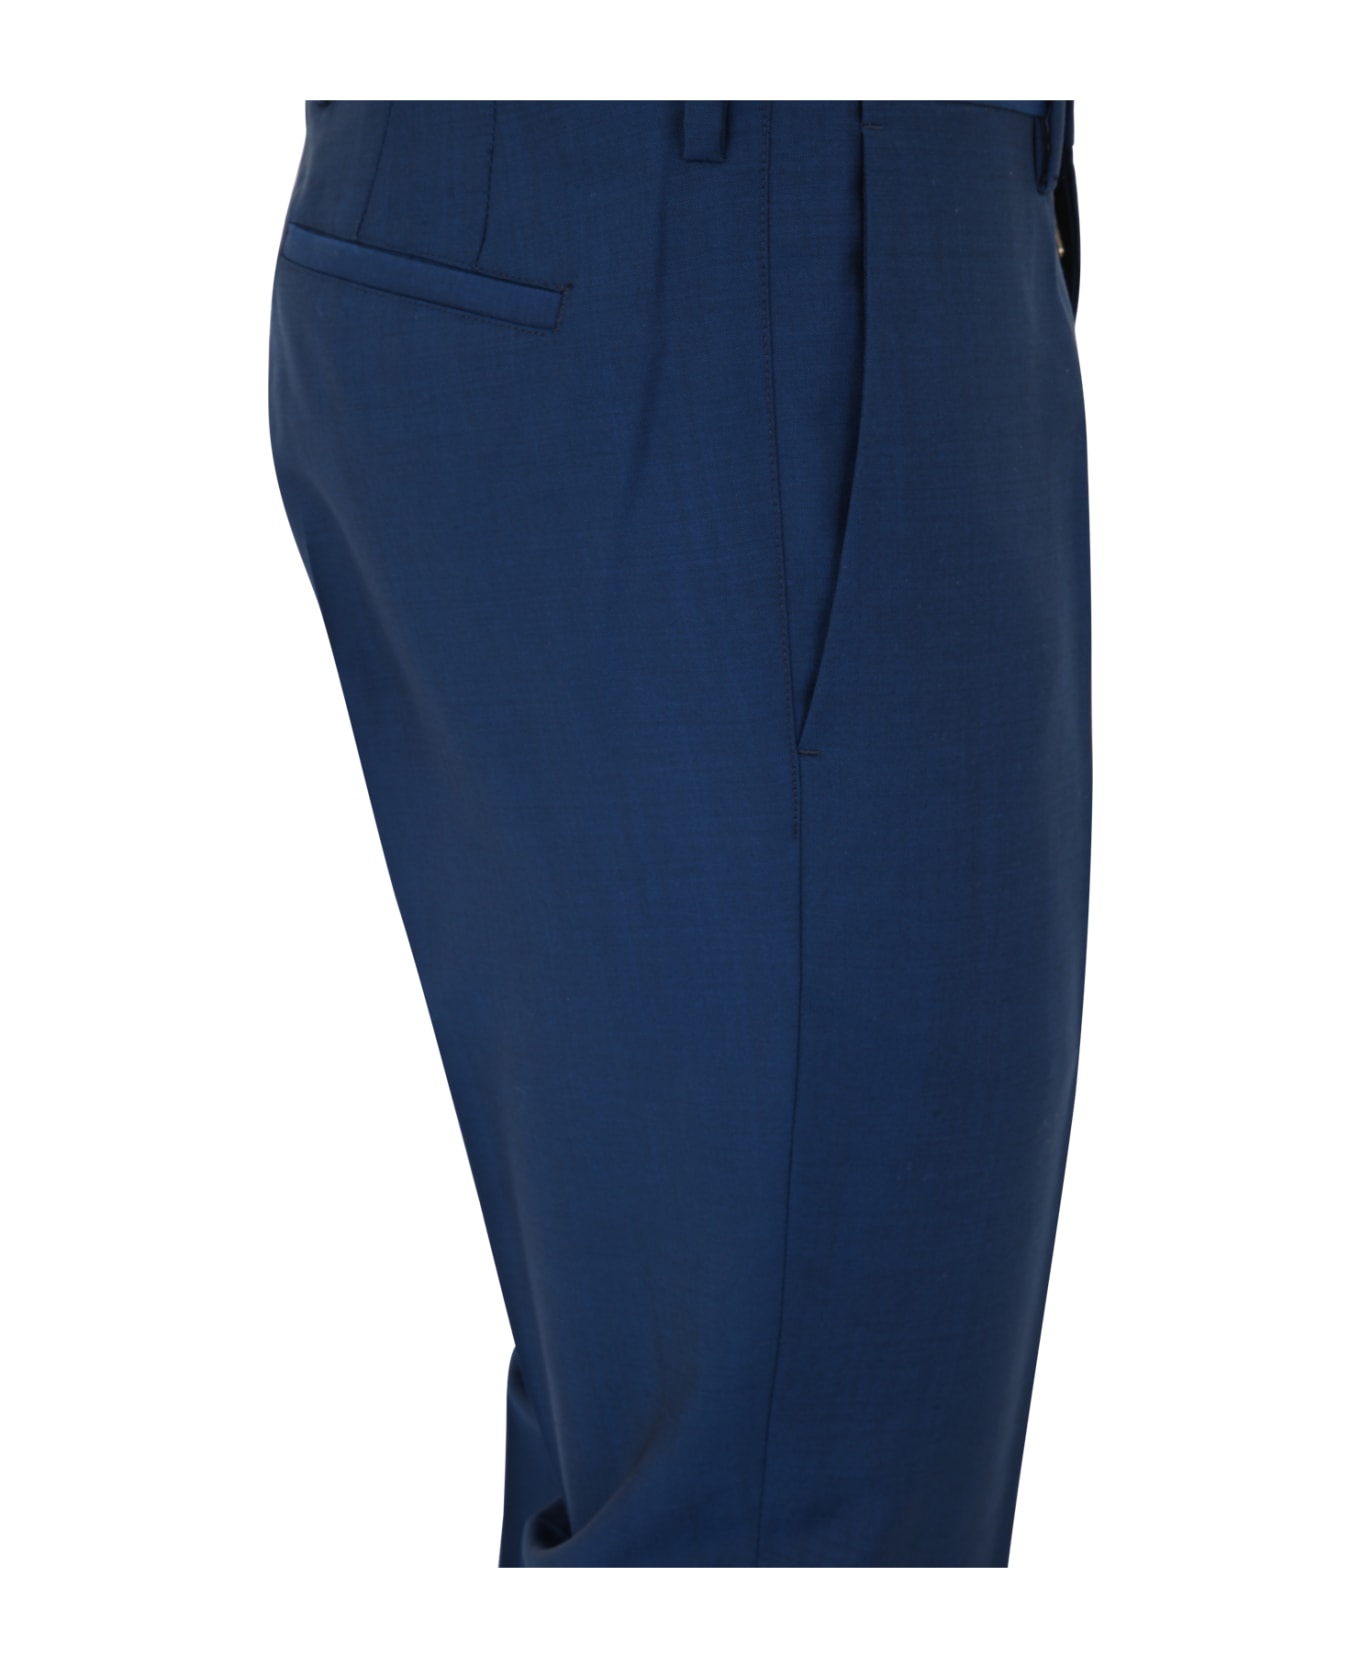 Paul Smith Mens Trousers - Blue